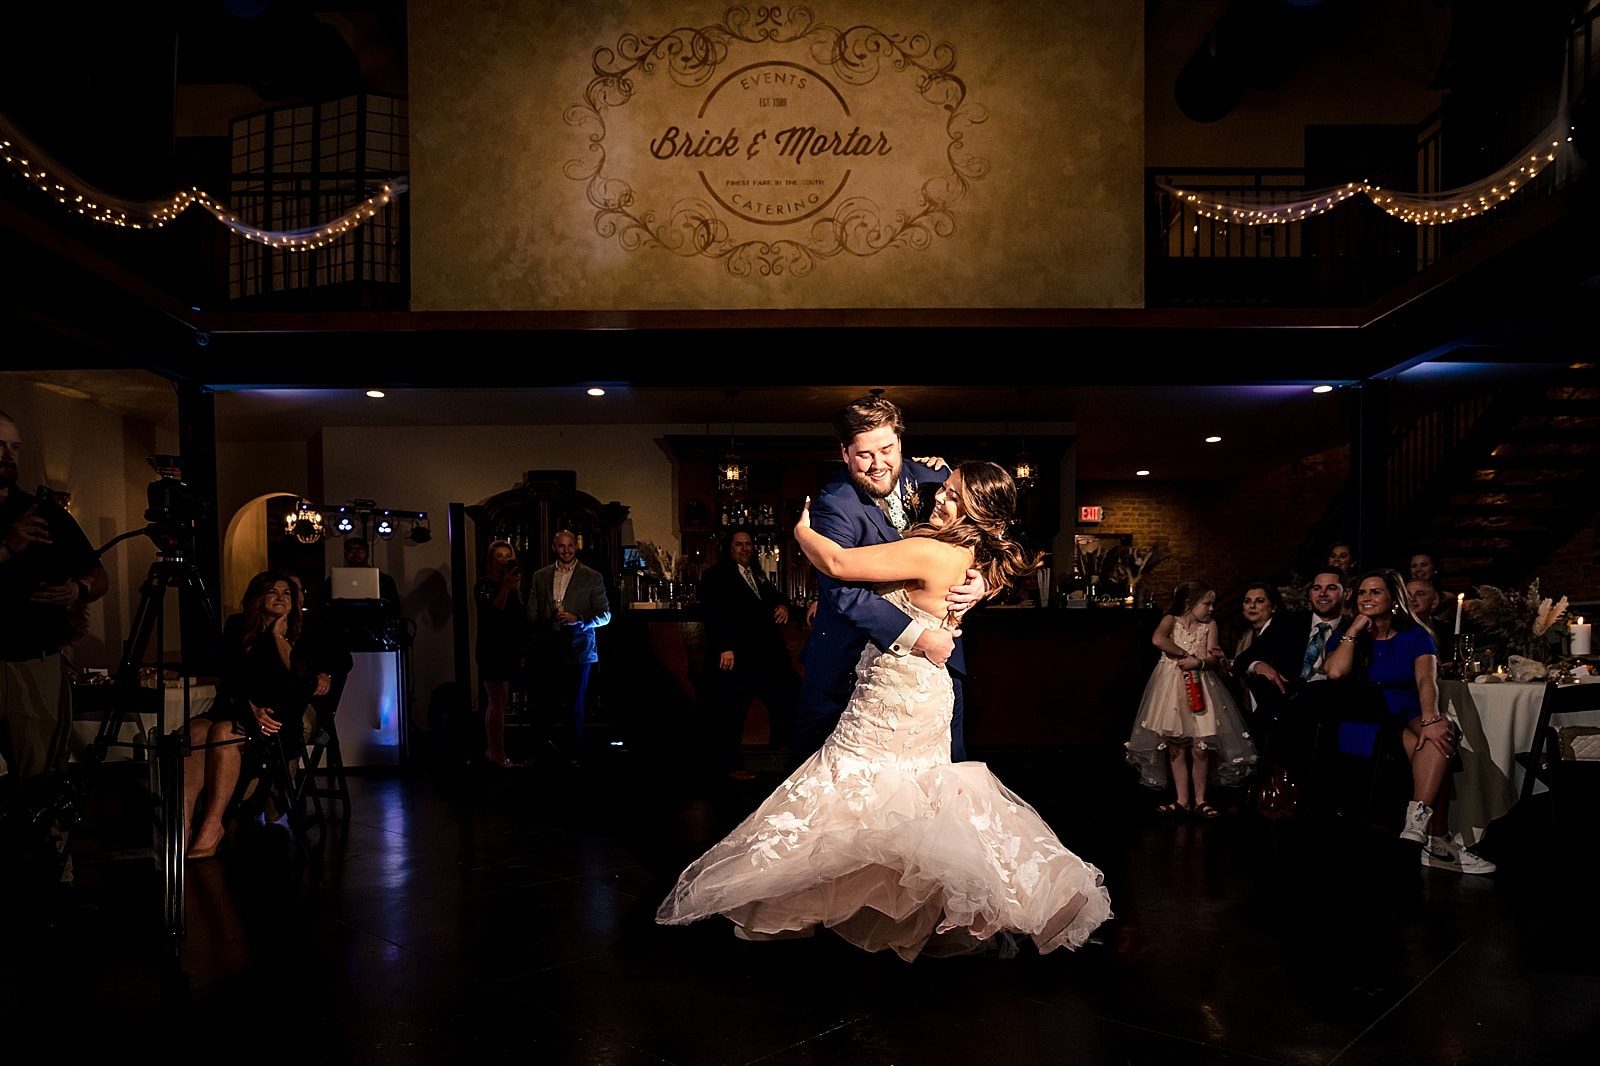 First dance twirl at Brick & Mortar Events wedding in Clayton, NC